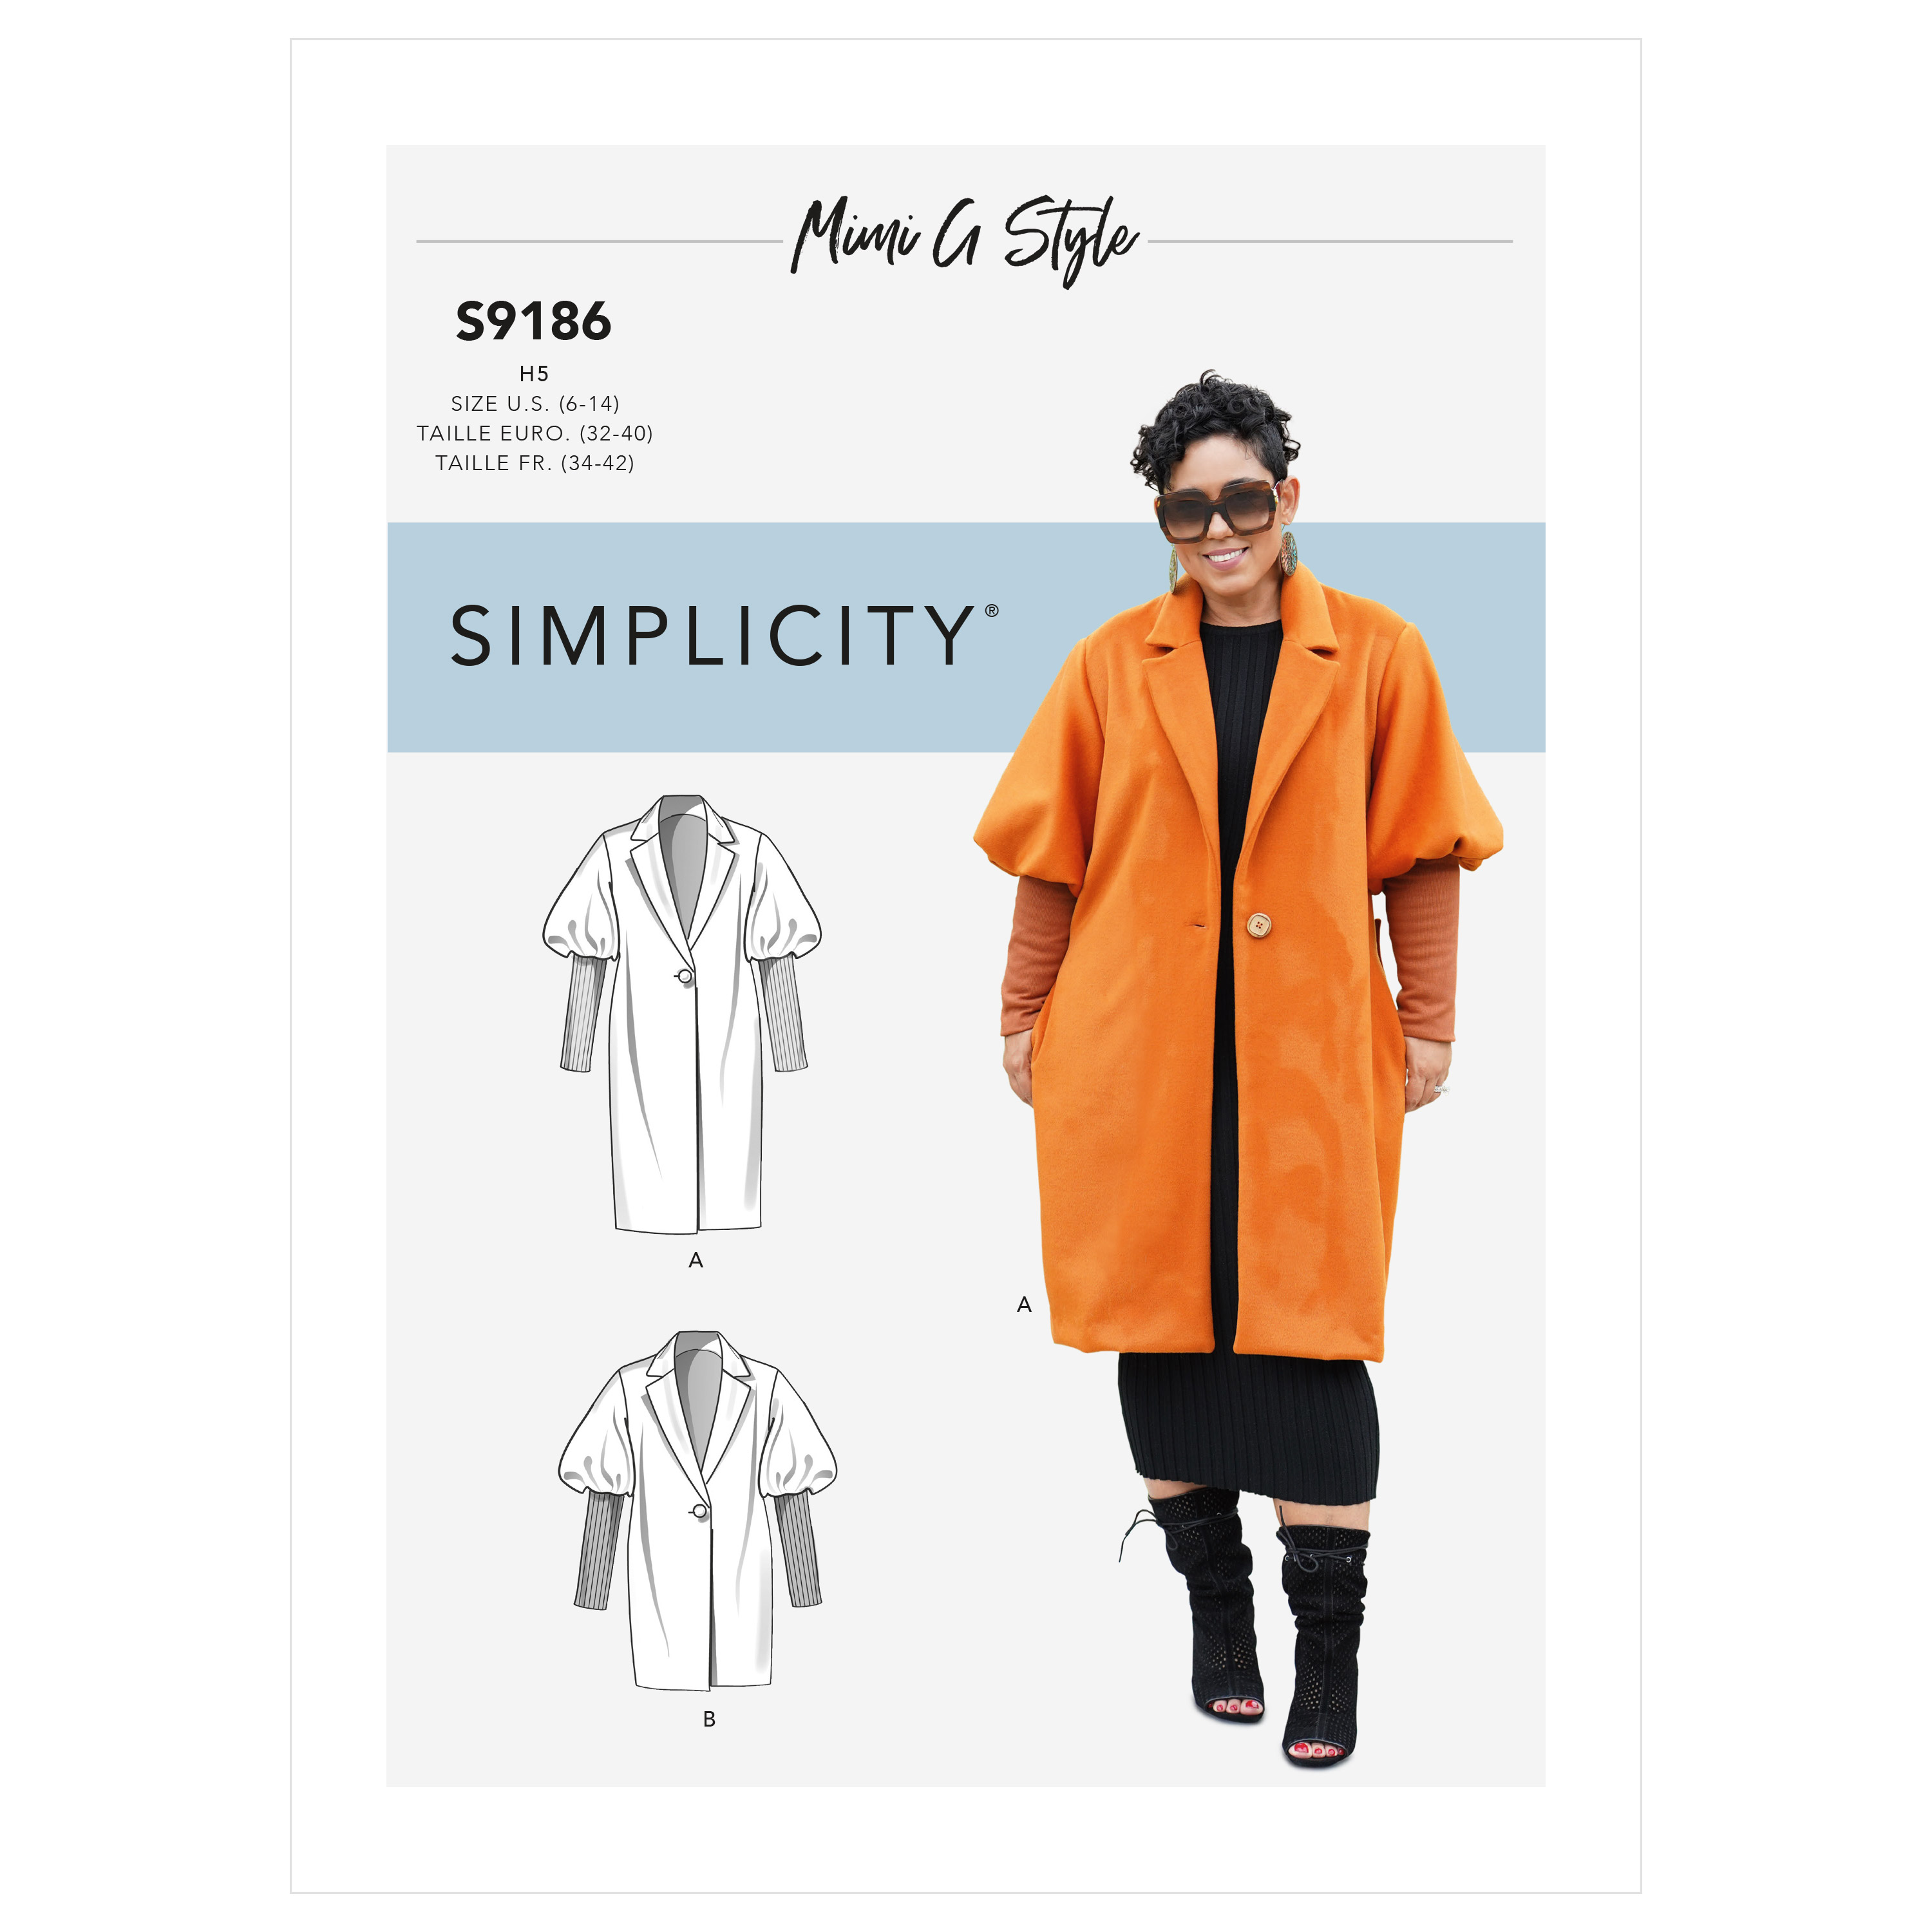 Simplicity 9186 Misses' Coat & Jacket By Mimi G Style